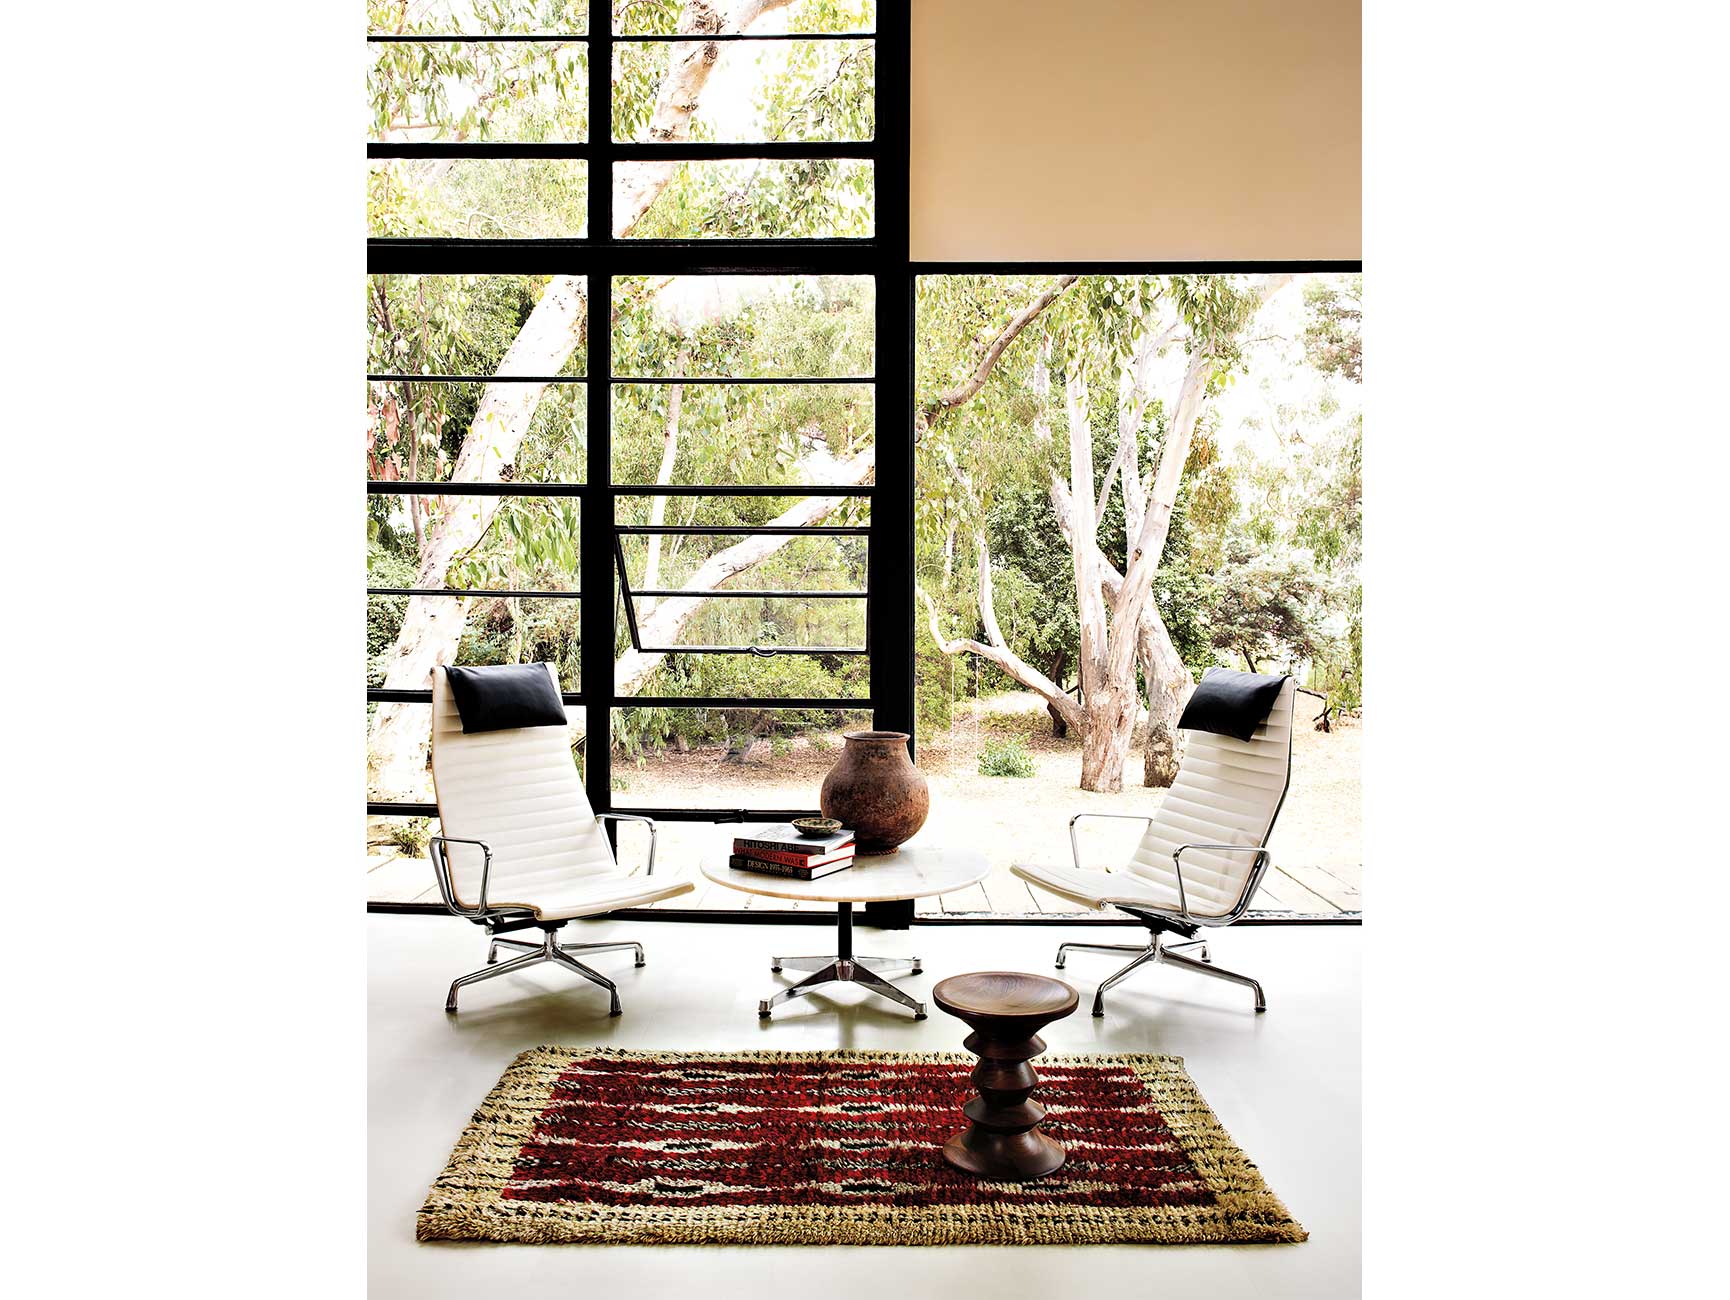 living-lounge-04 Eames Table Contract Base Round, Eames Aluminium Chair